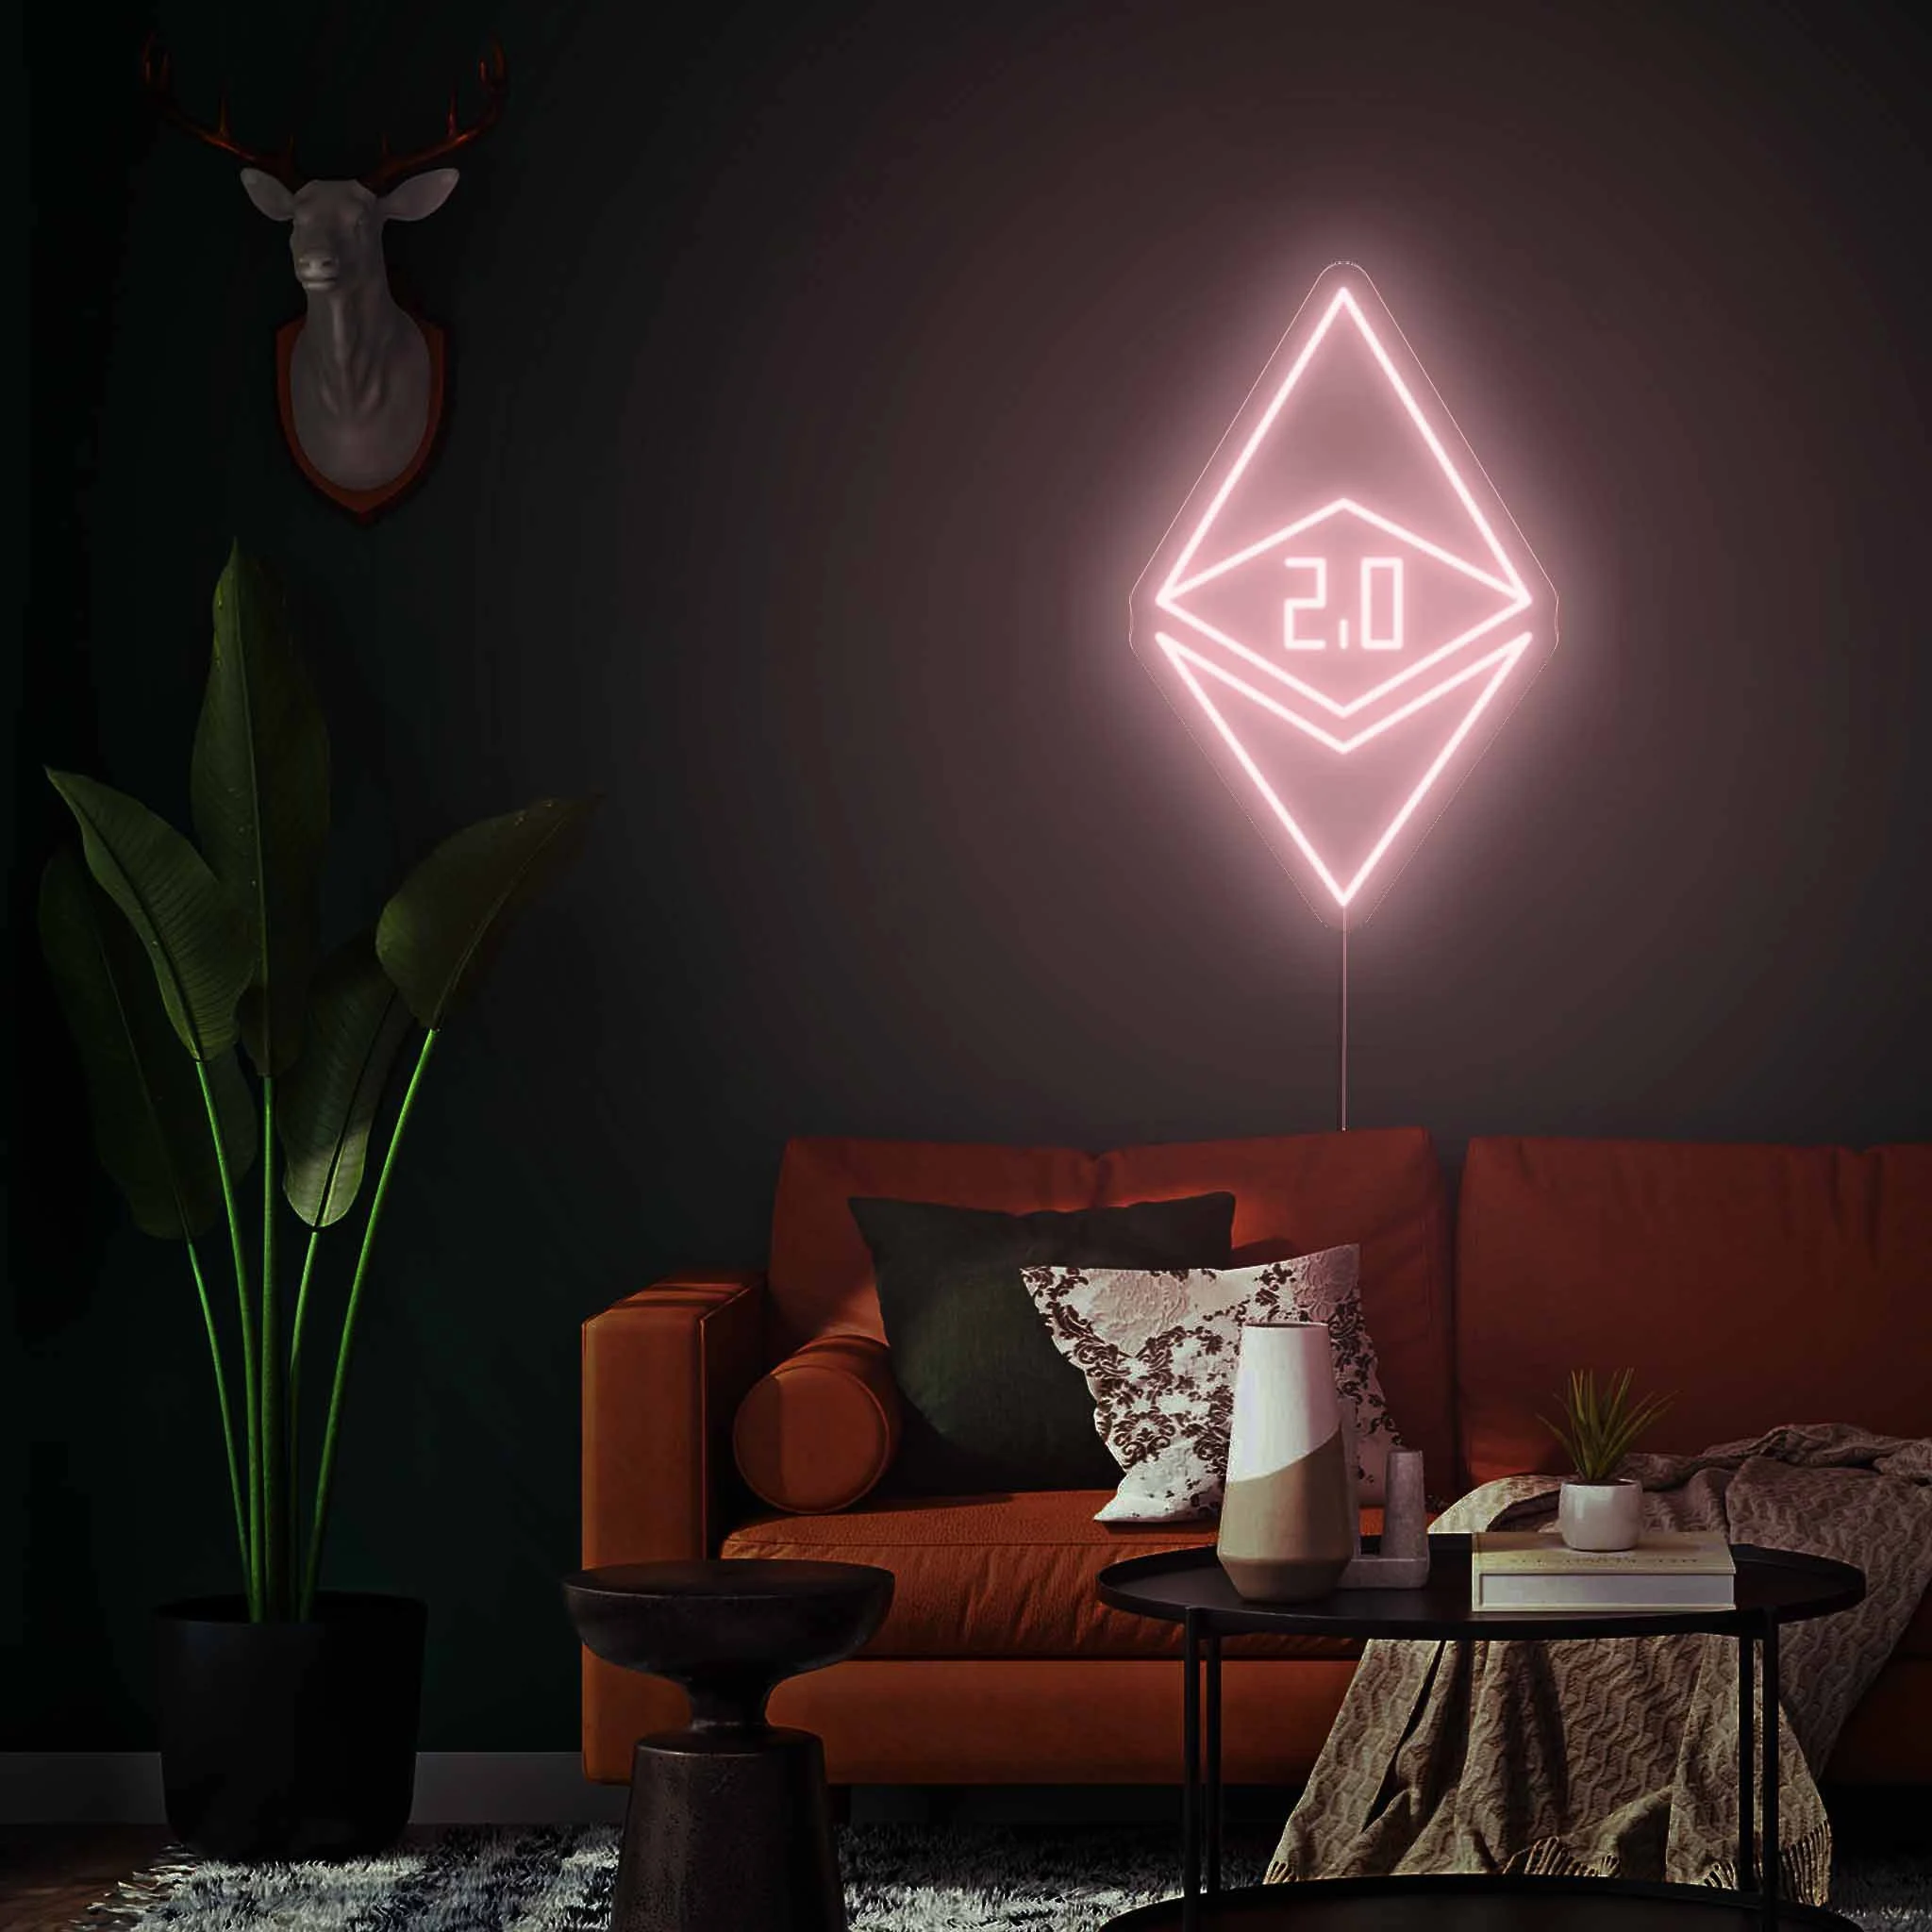 An Ethereum neon sign displayed on the wall